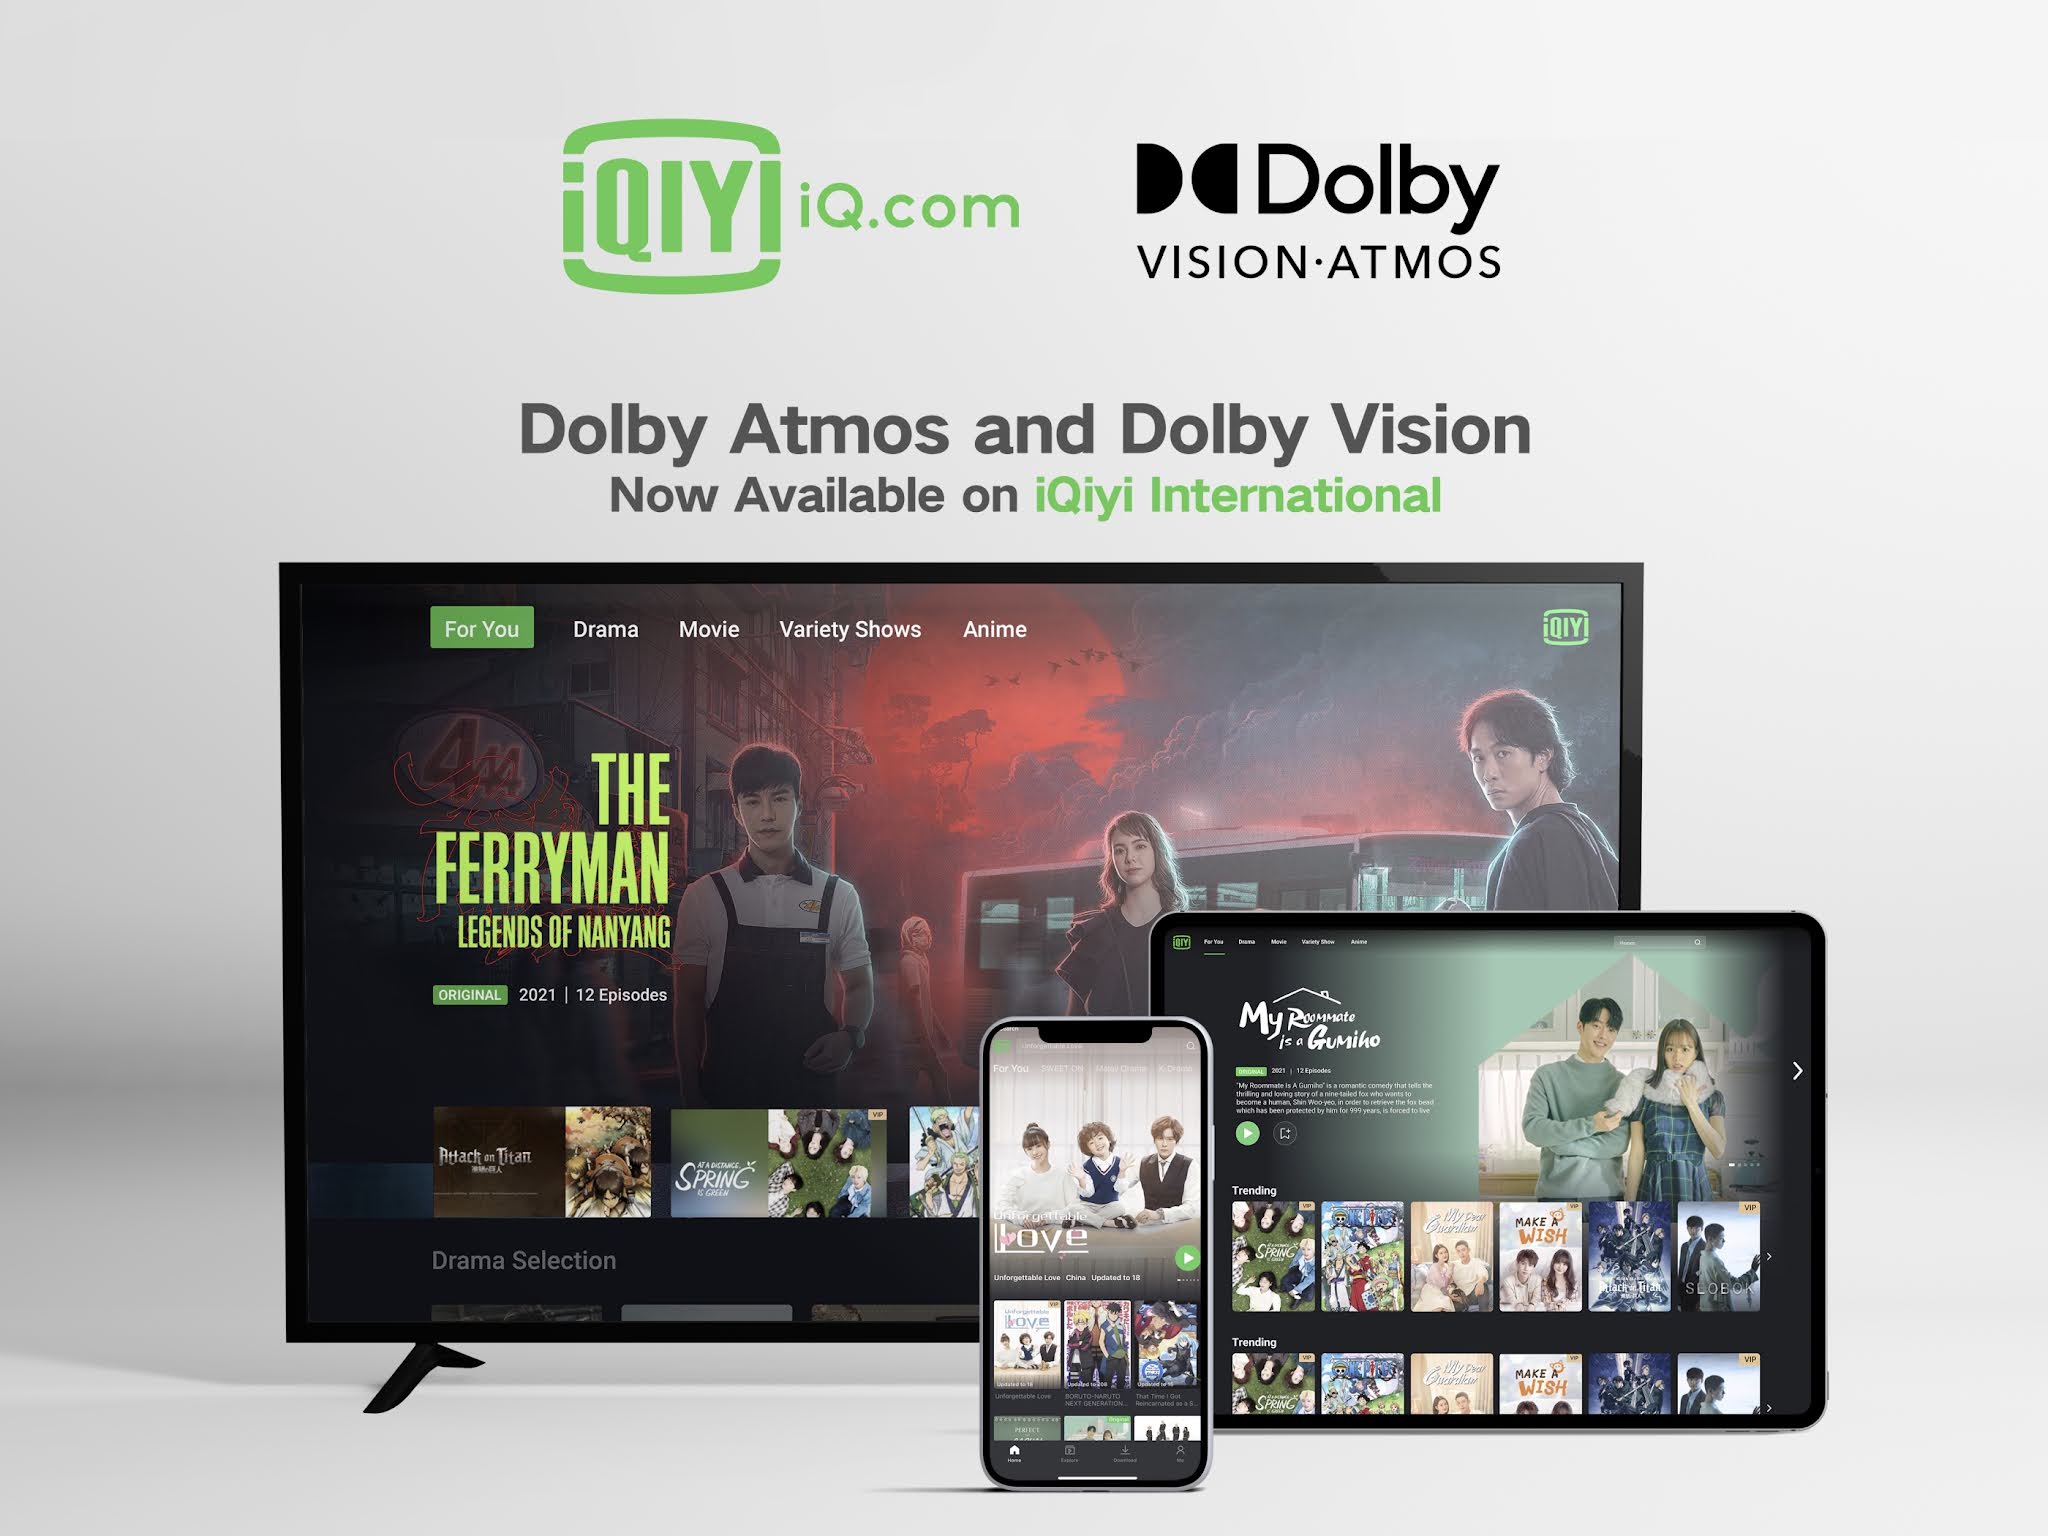 Dolby Vision and Dolby Atmos Coming to iQiyi - Experience Awesome Cinematic Visuals and Sounds Like No Other!